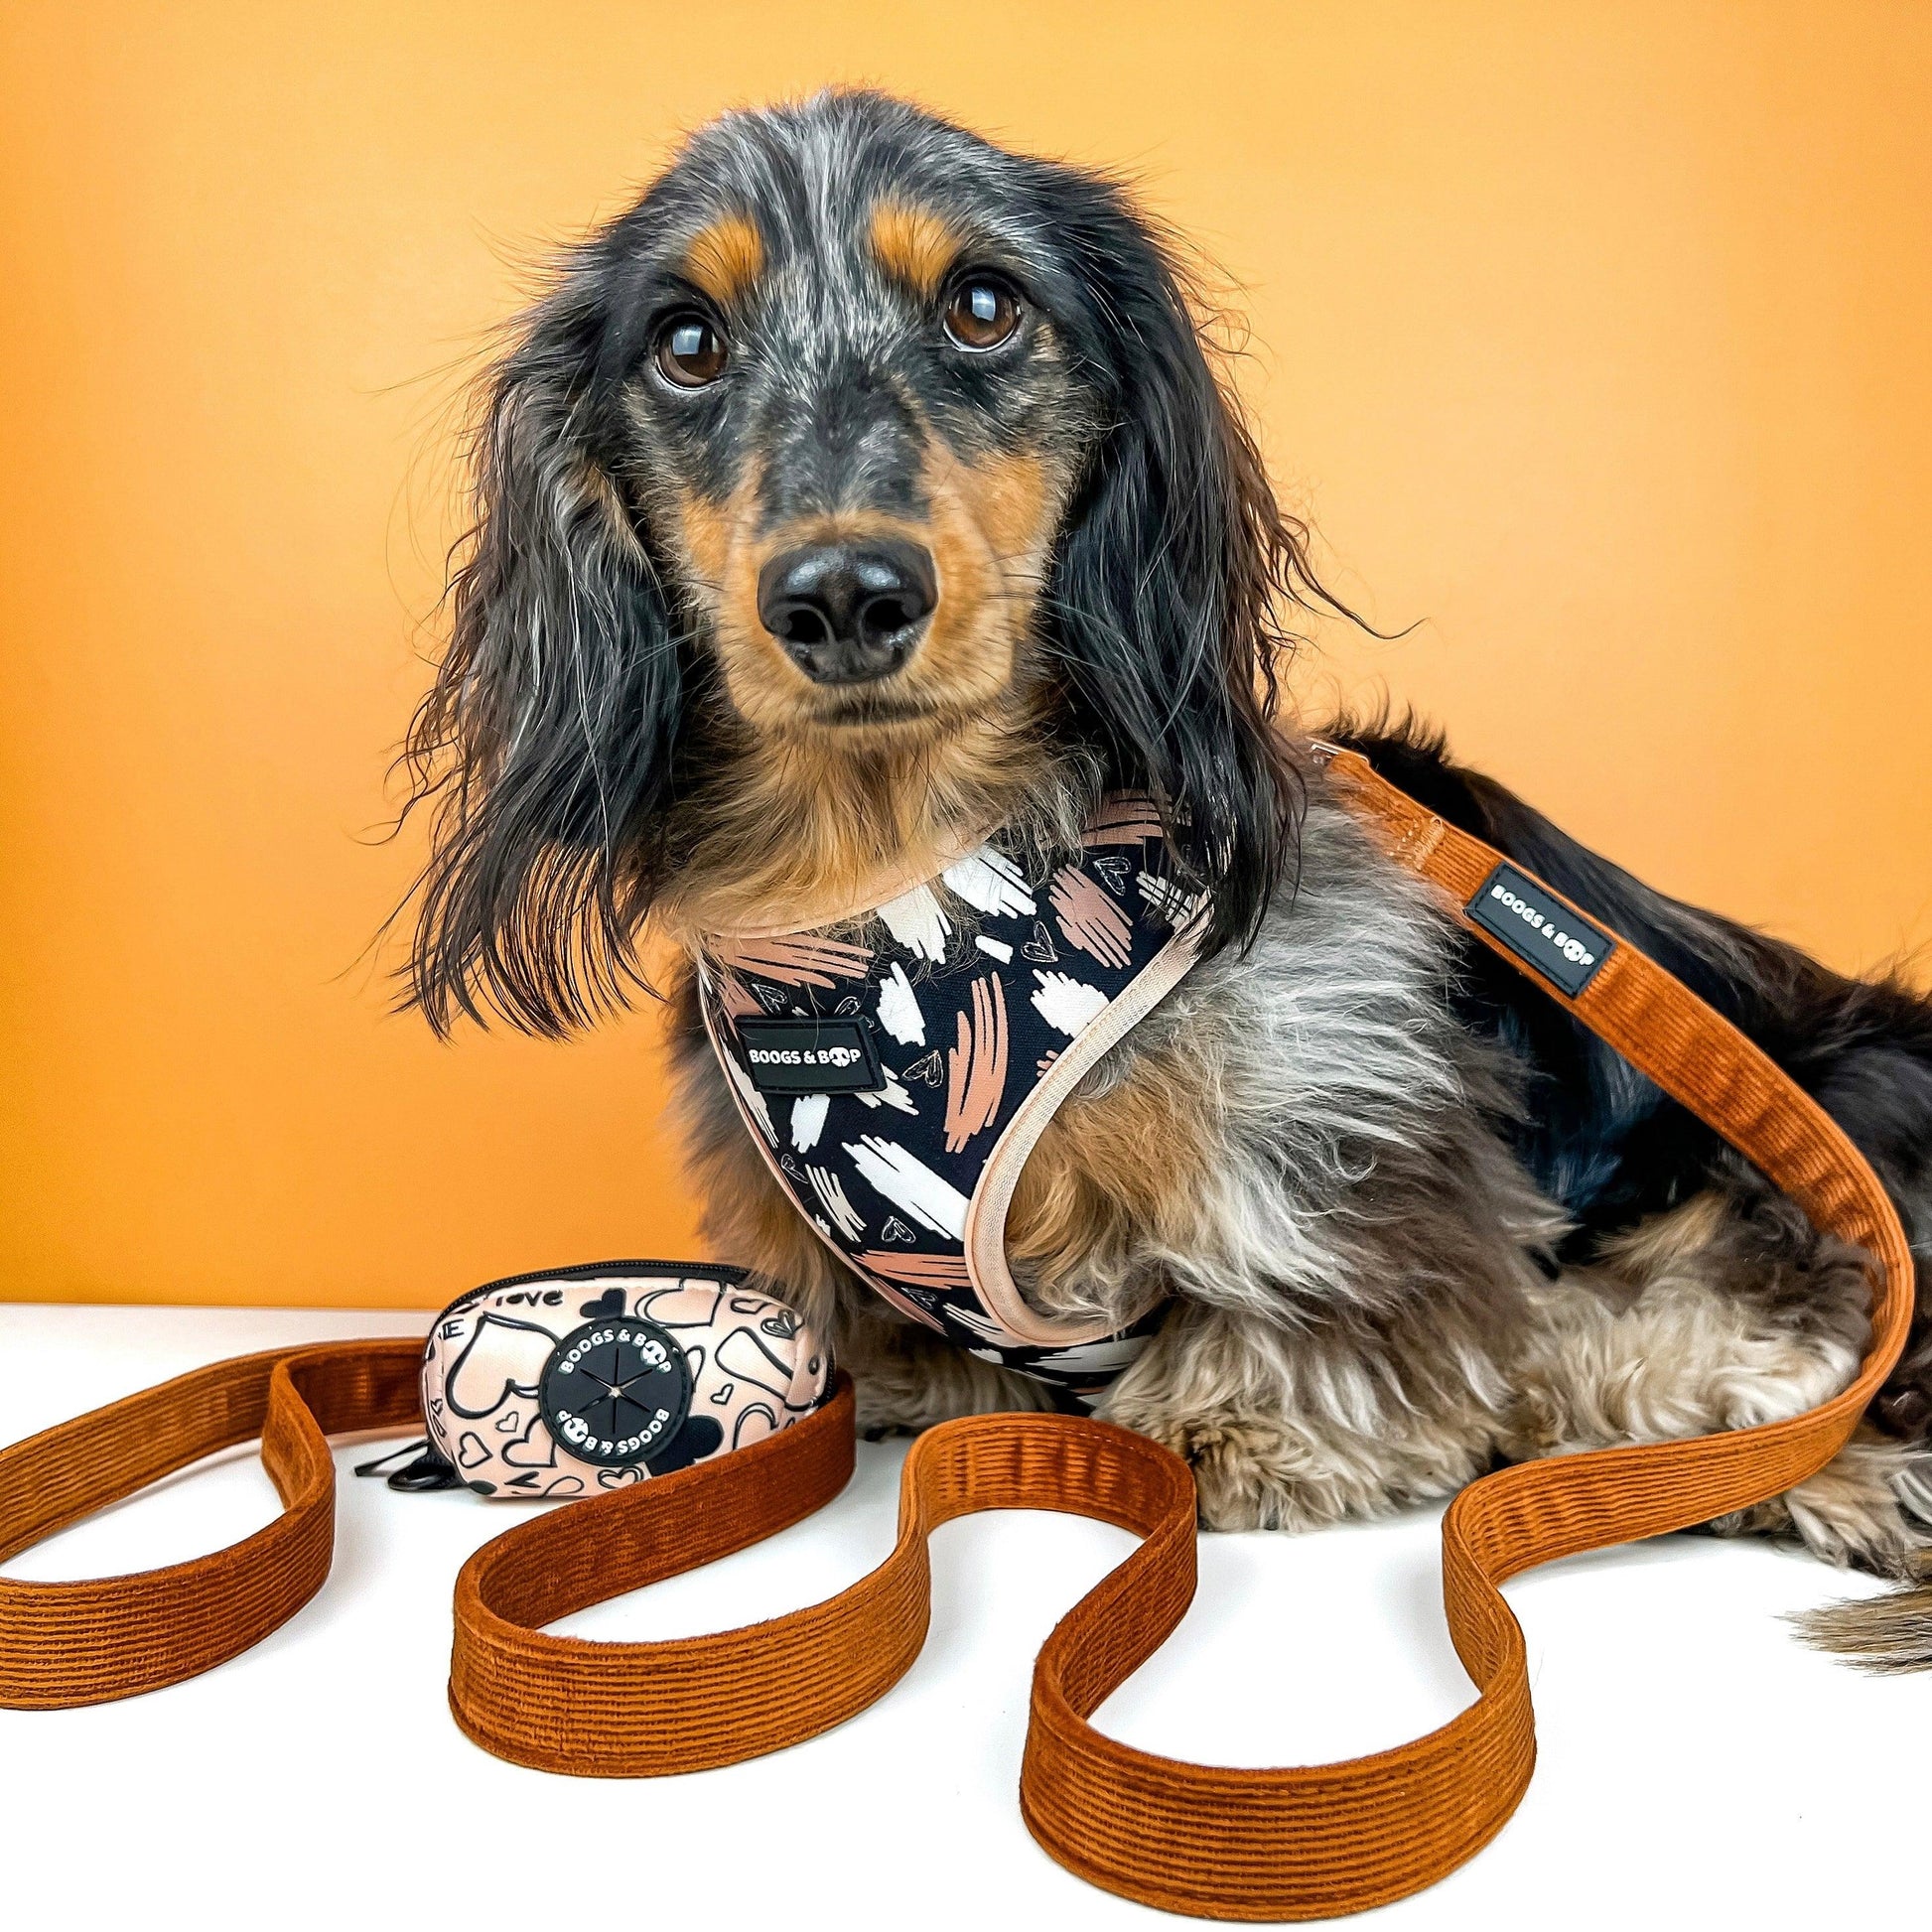 Longhaired Dachshund Wearing Boogs & Boop Signature Harness.